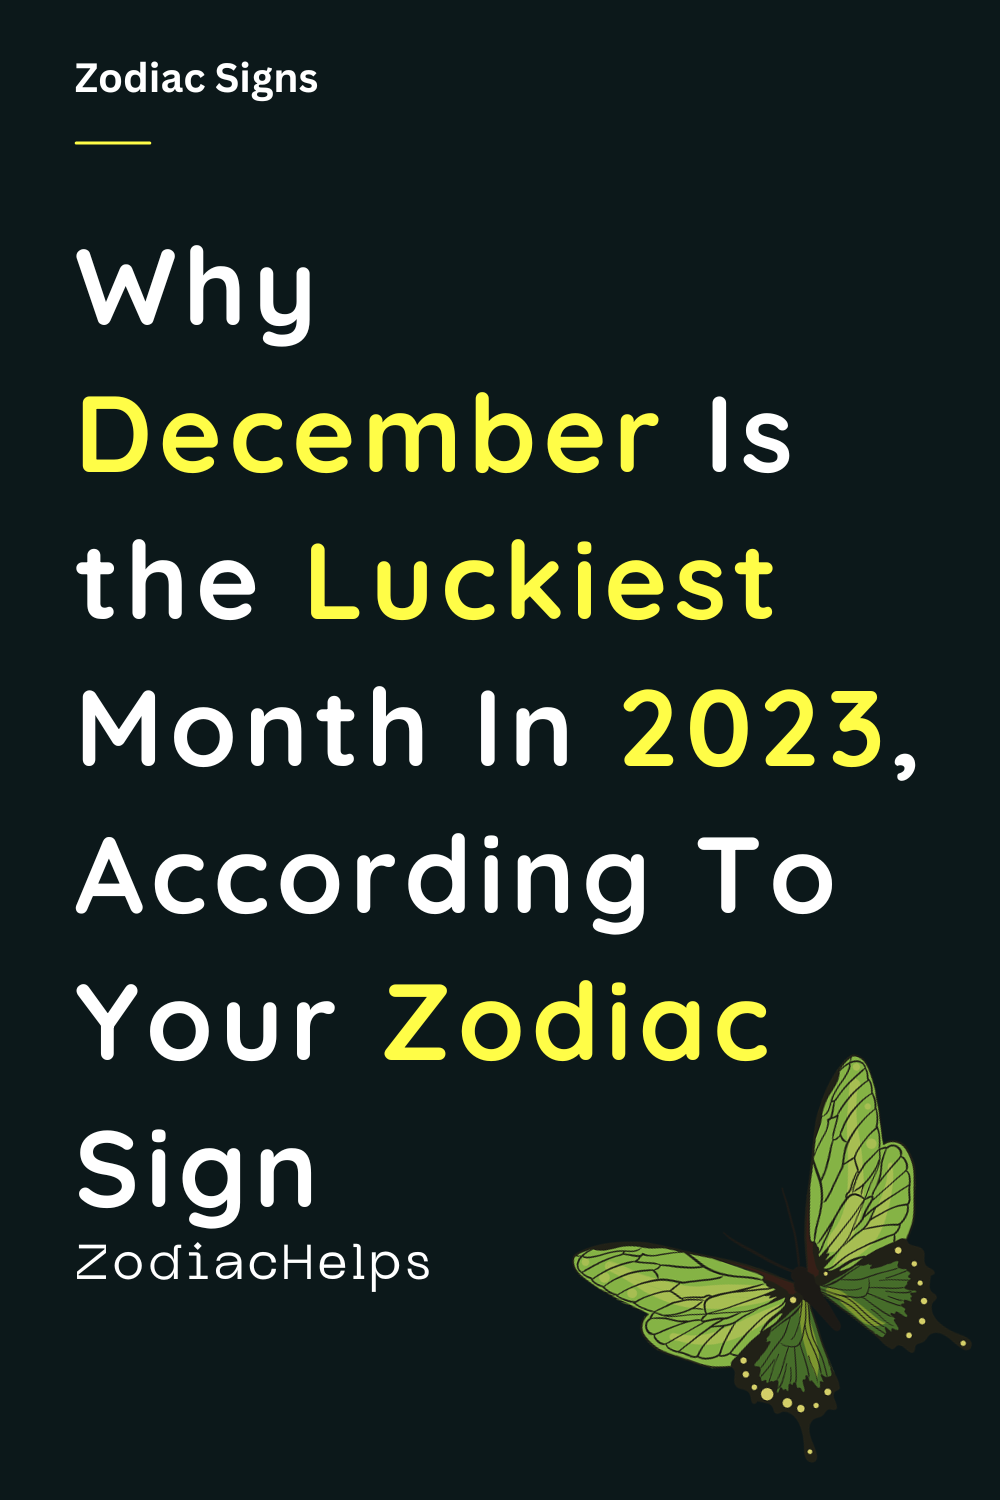 Why December Is the Luckiest Month In 2023, According To Your Zodiac Sign